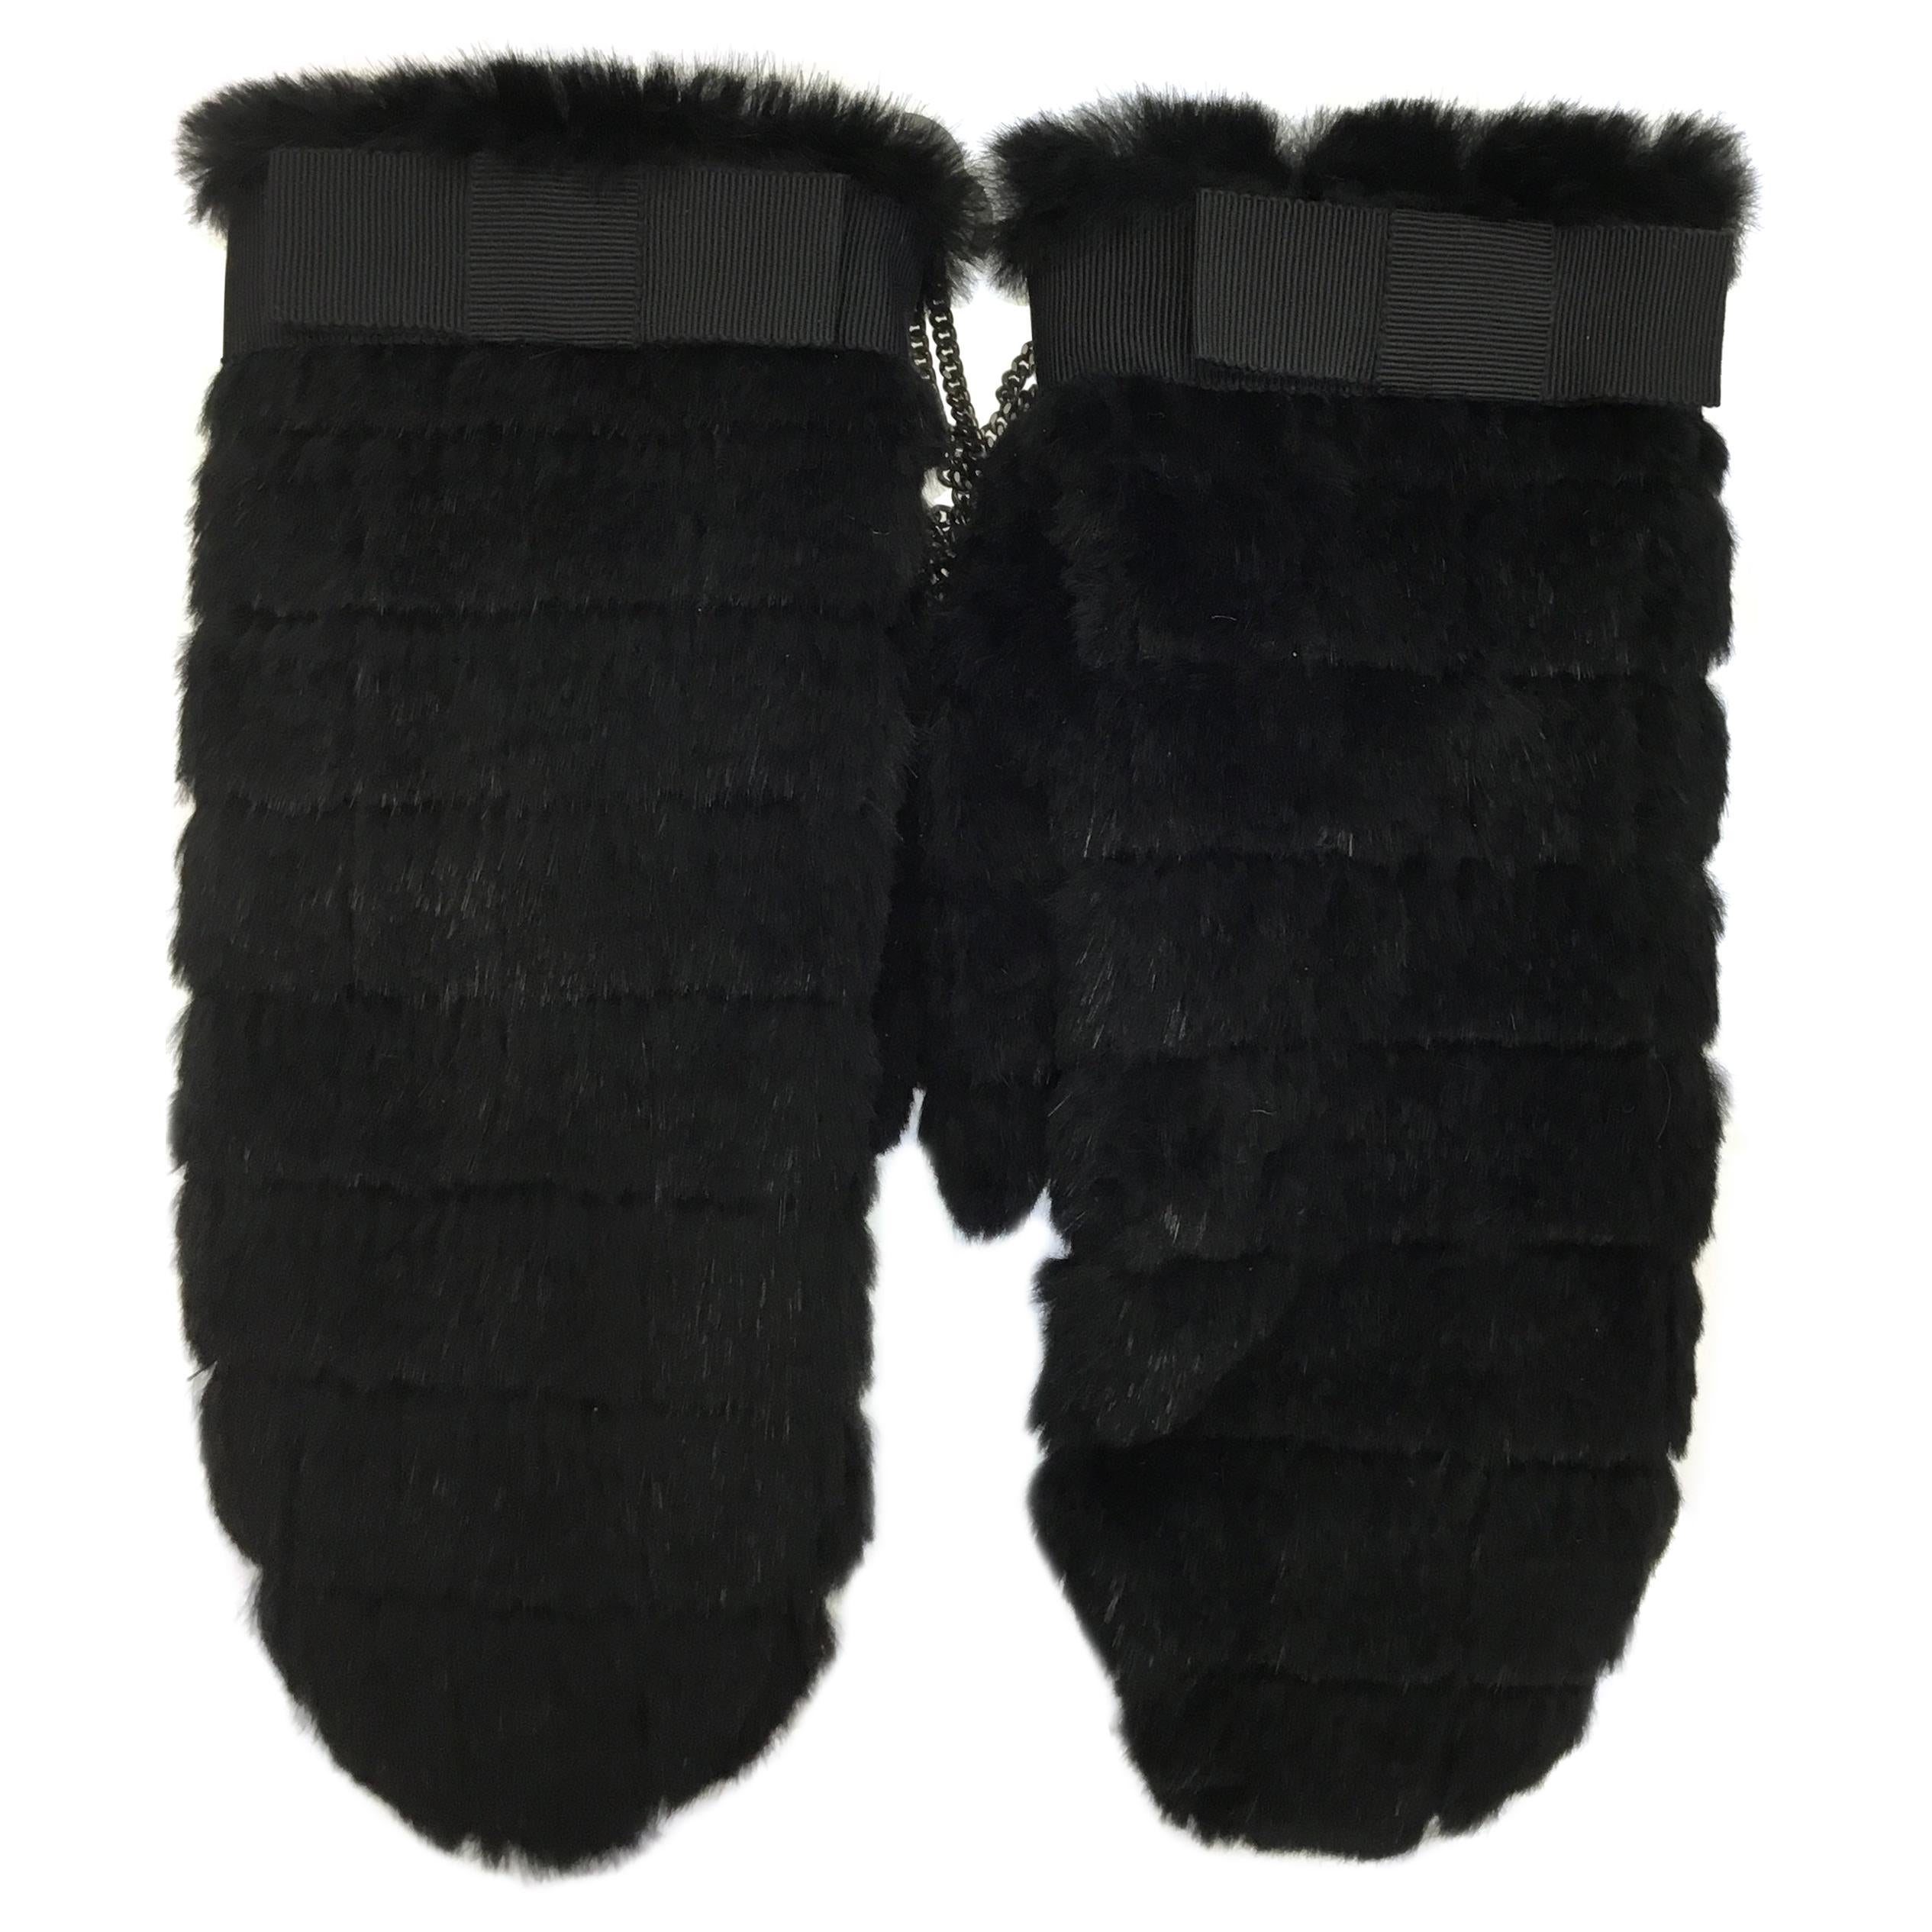 Chanel Knit Rabbit Fur Mittens with Chain